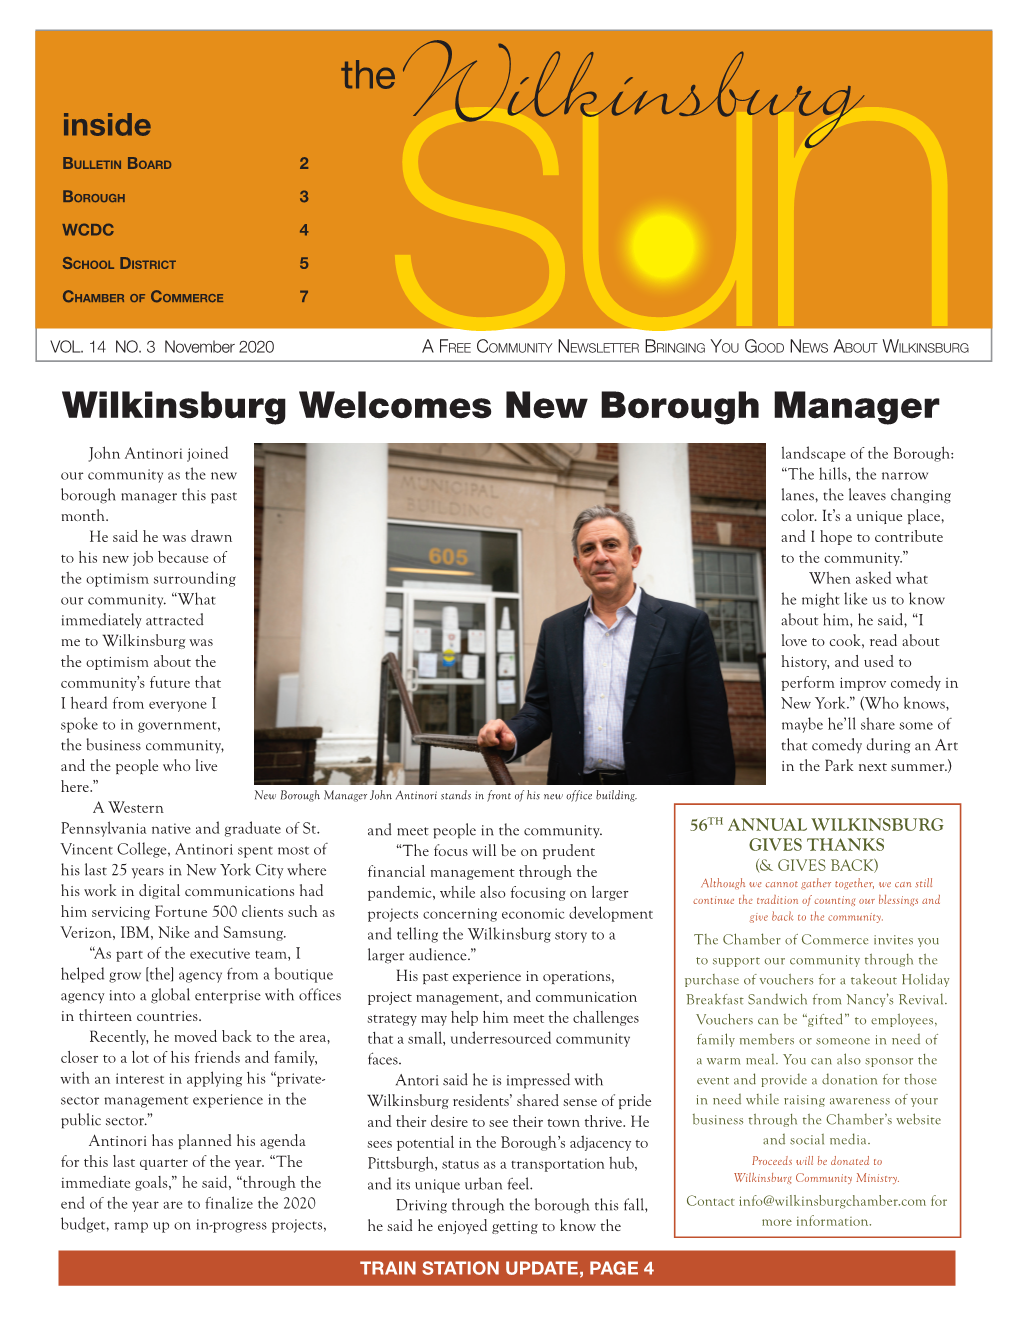 Wilkinsburg Welcomes New Borough Manager